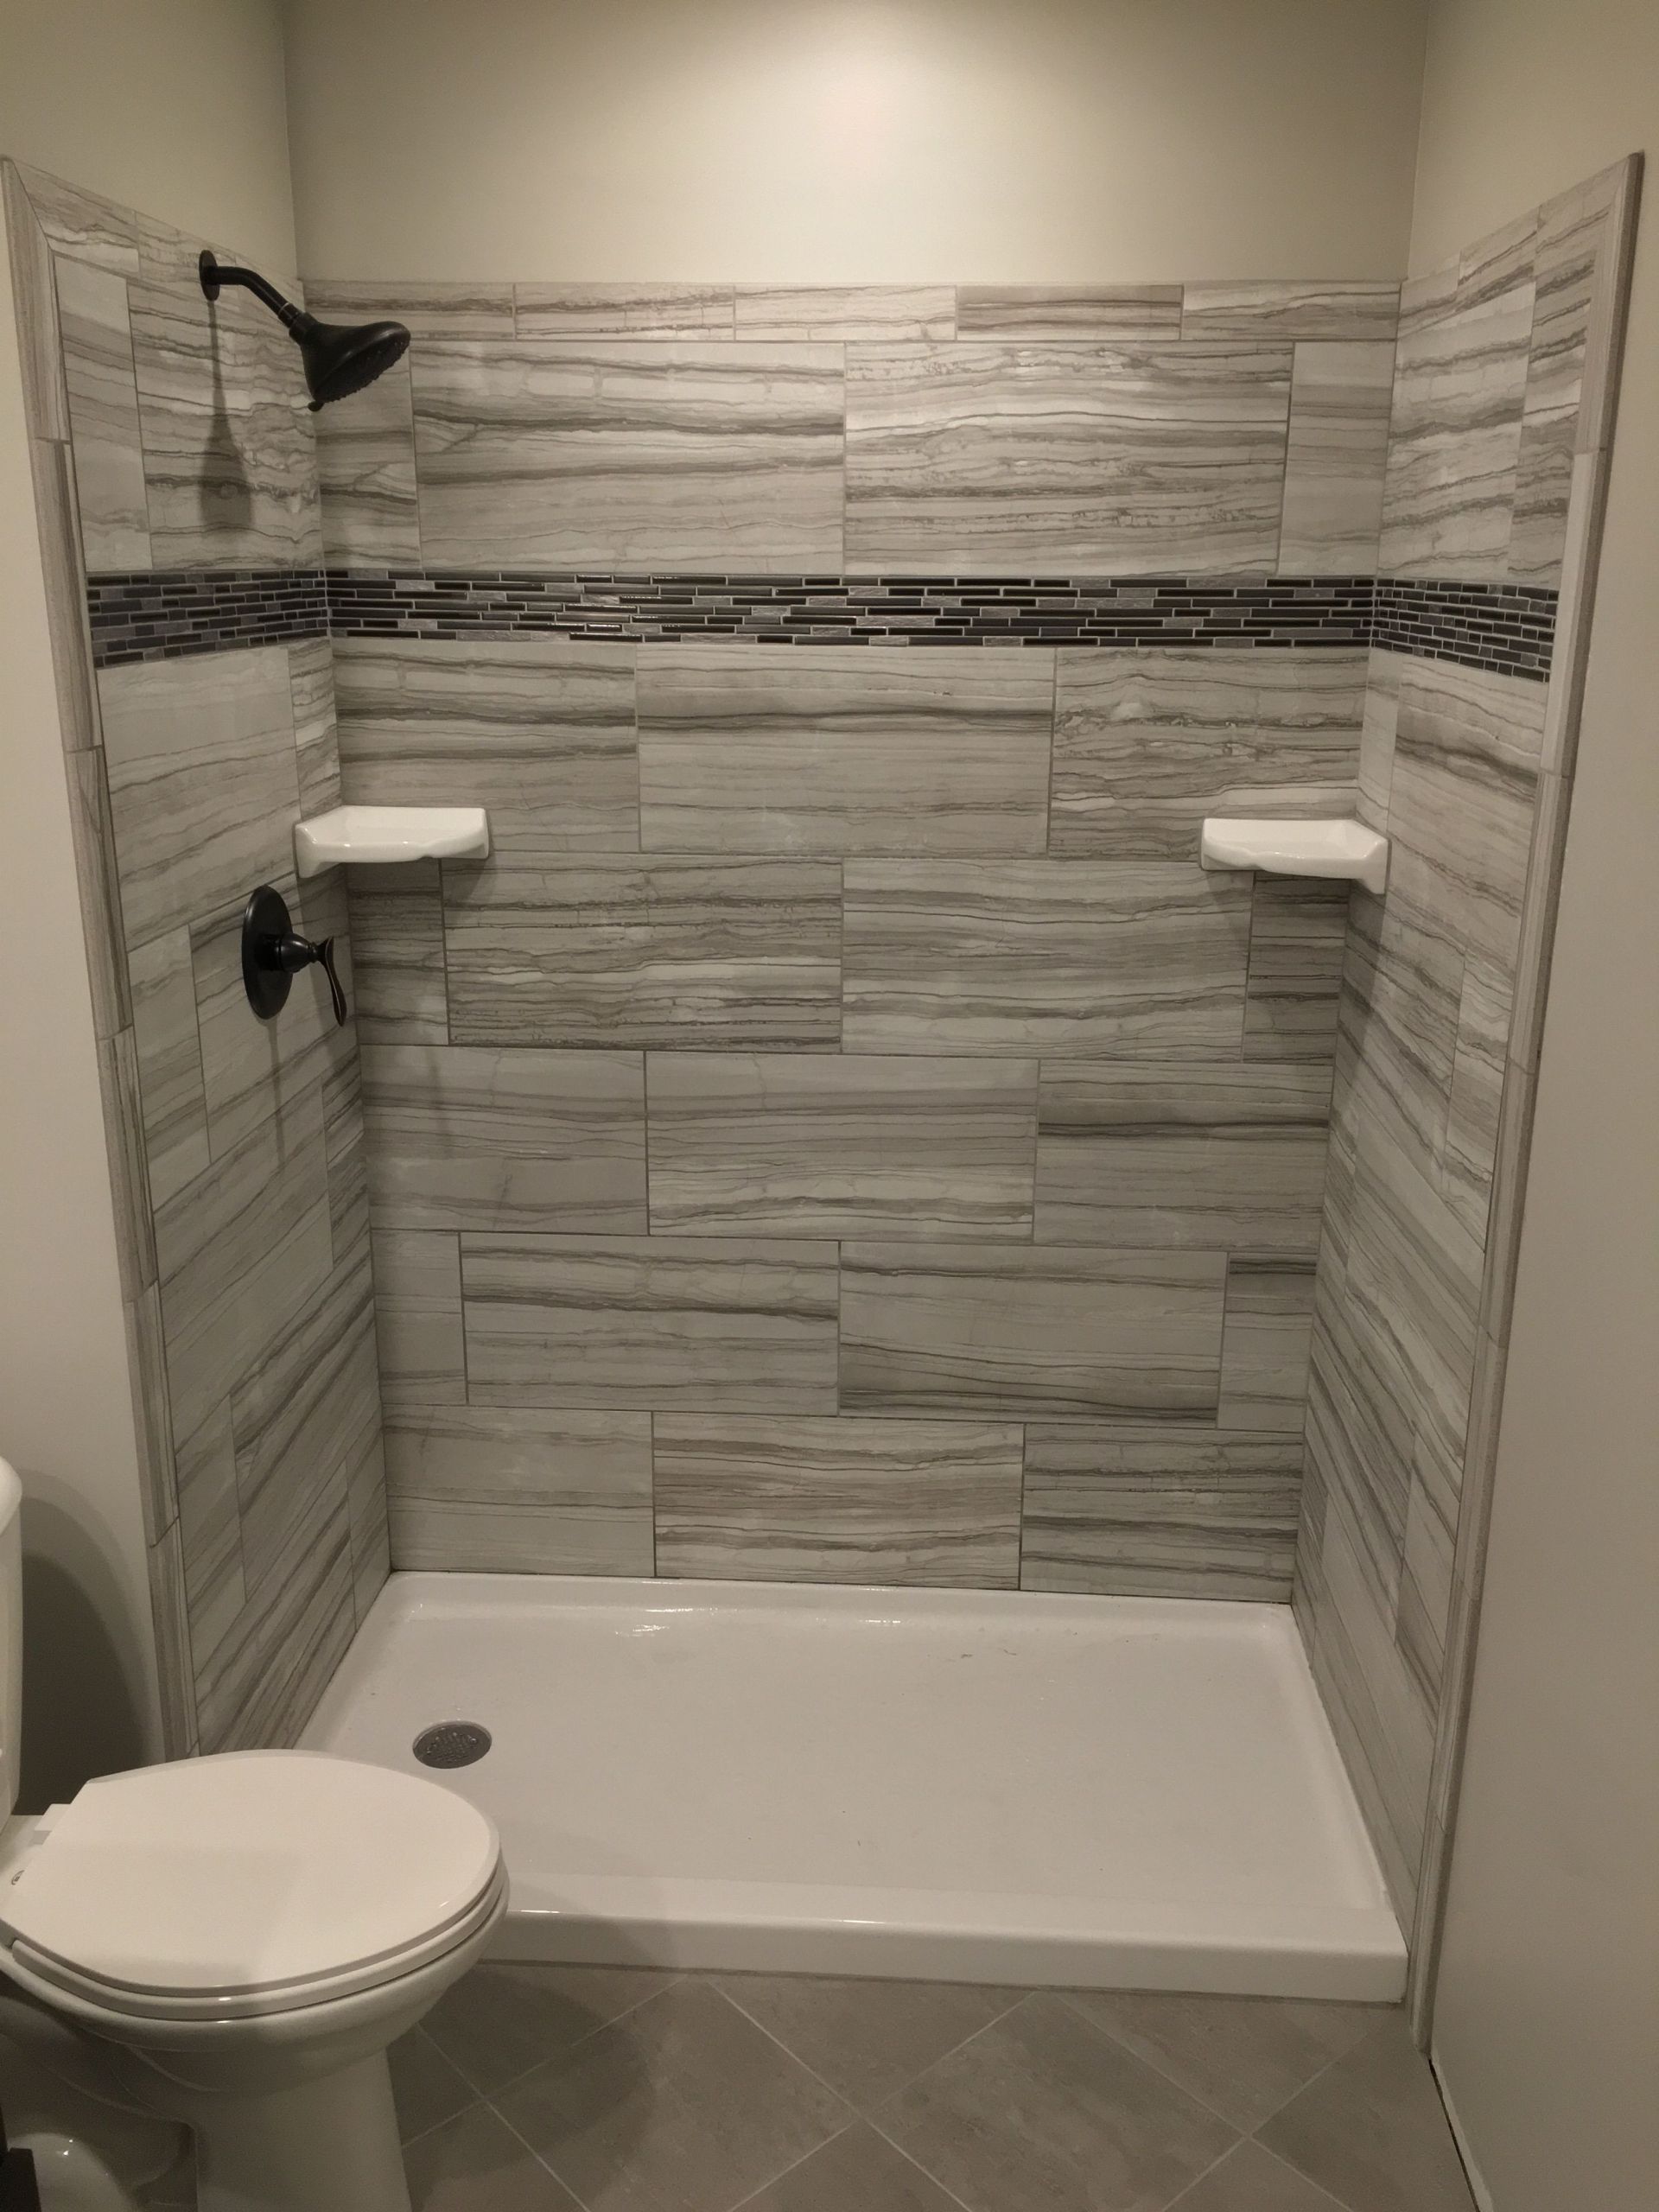 Home Depot Bathroom Remodel Ideas
 Tile shower Grigio from Home Depot